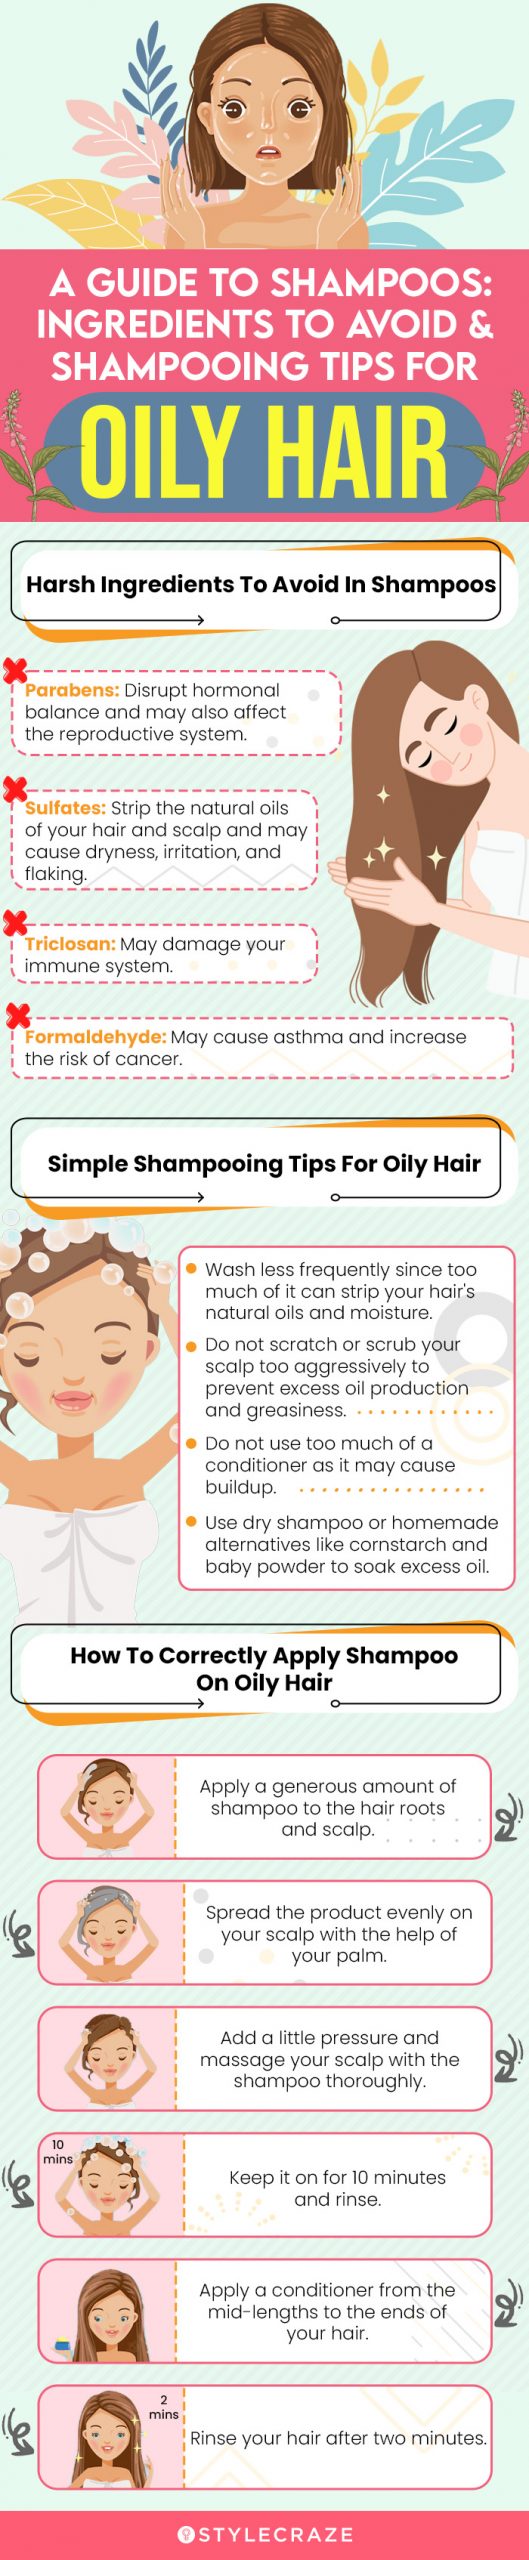 Ingredients To Avoid & Shampooing Tips For Oily Hair (infographic)